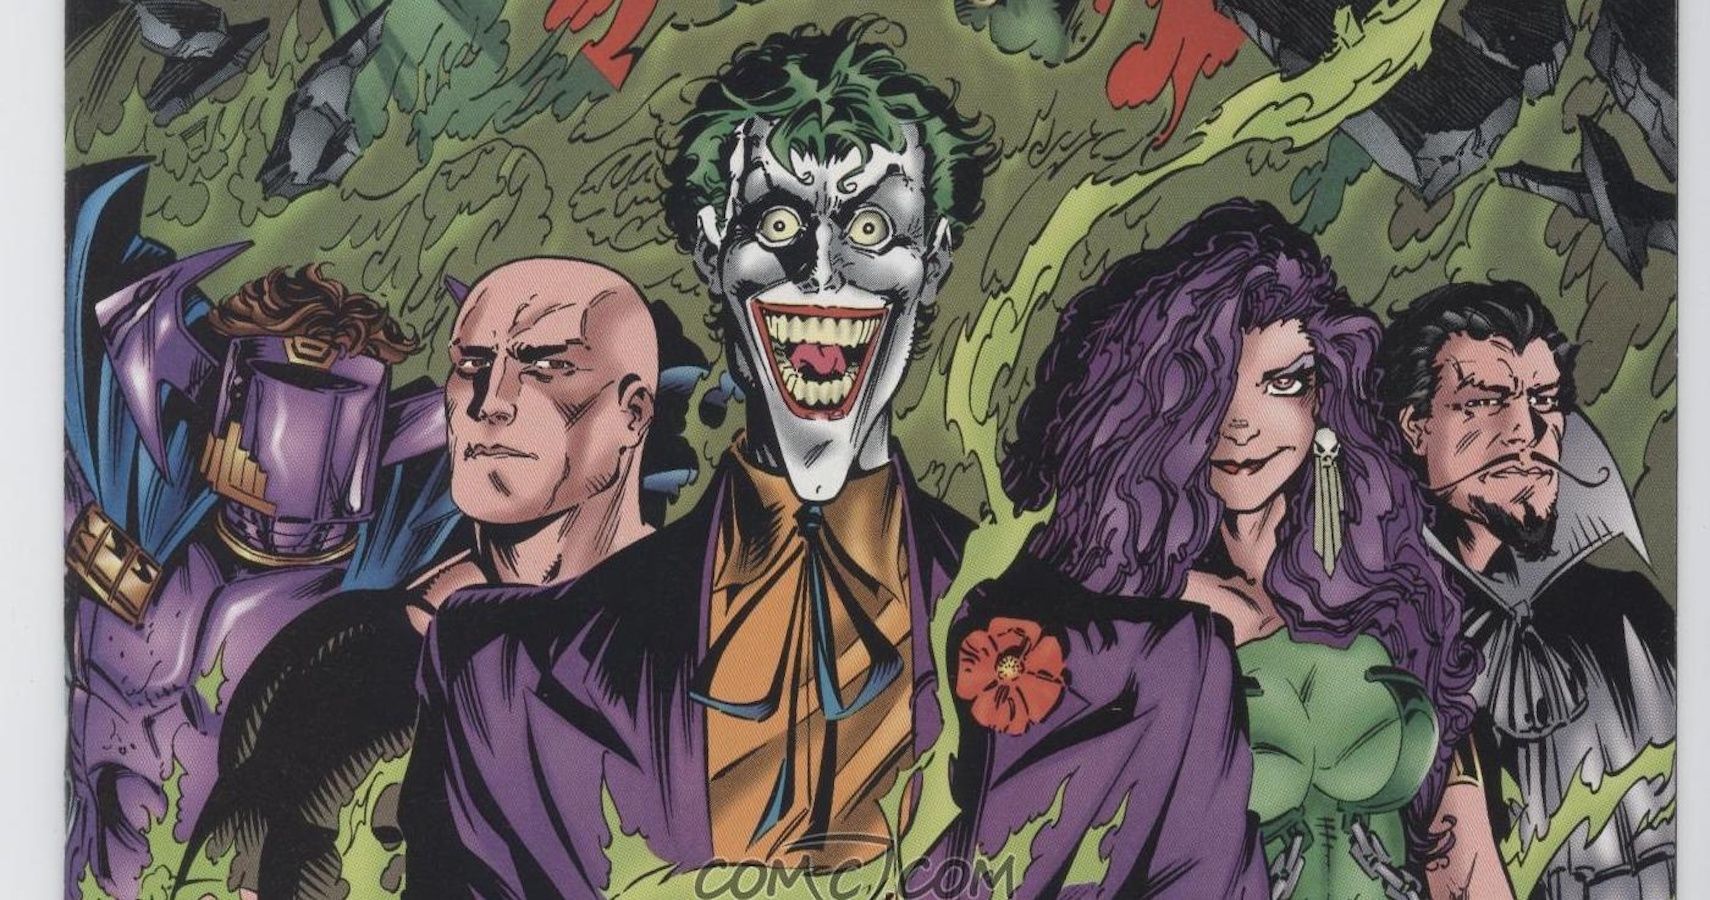 DC Comics: 10 DC Comics Storylines That Could Become The Next